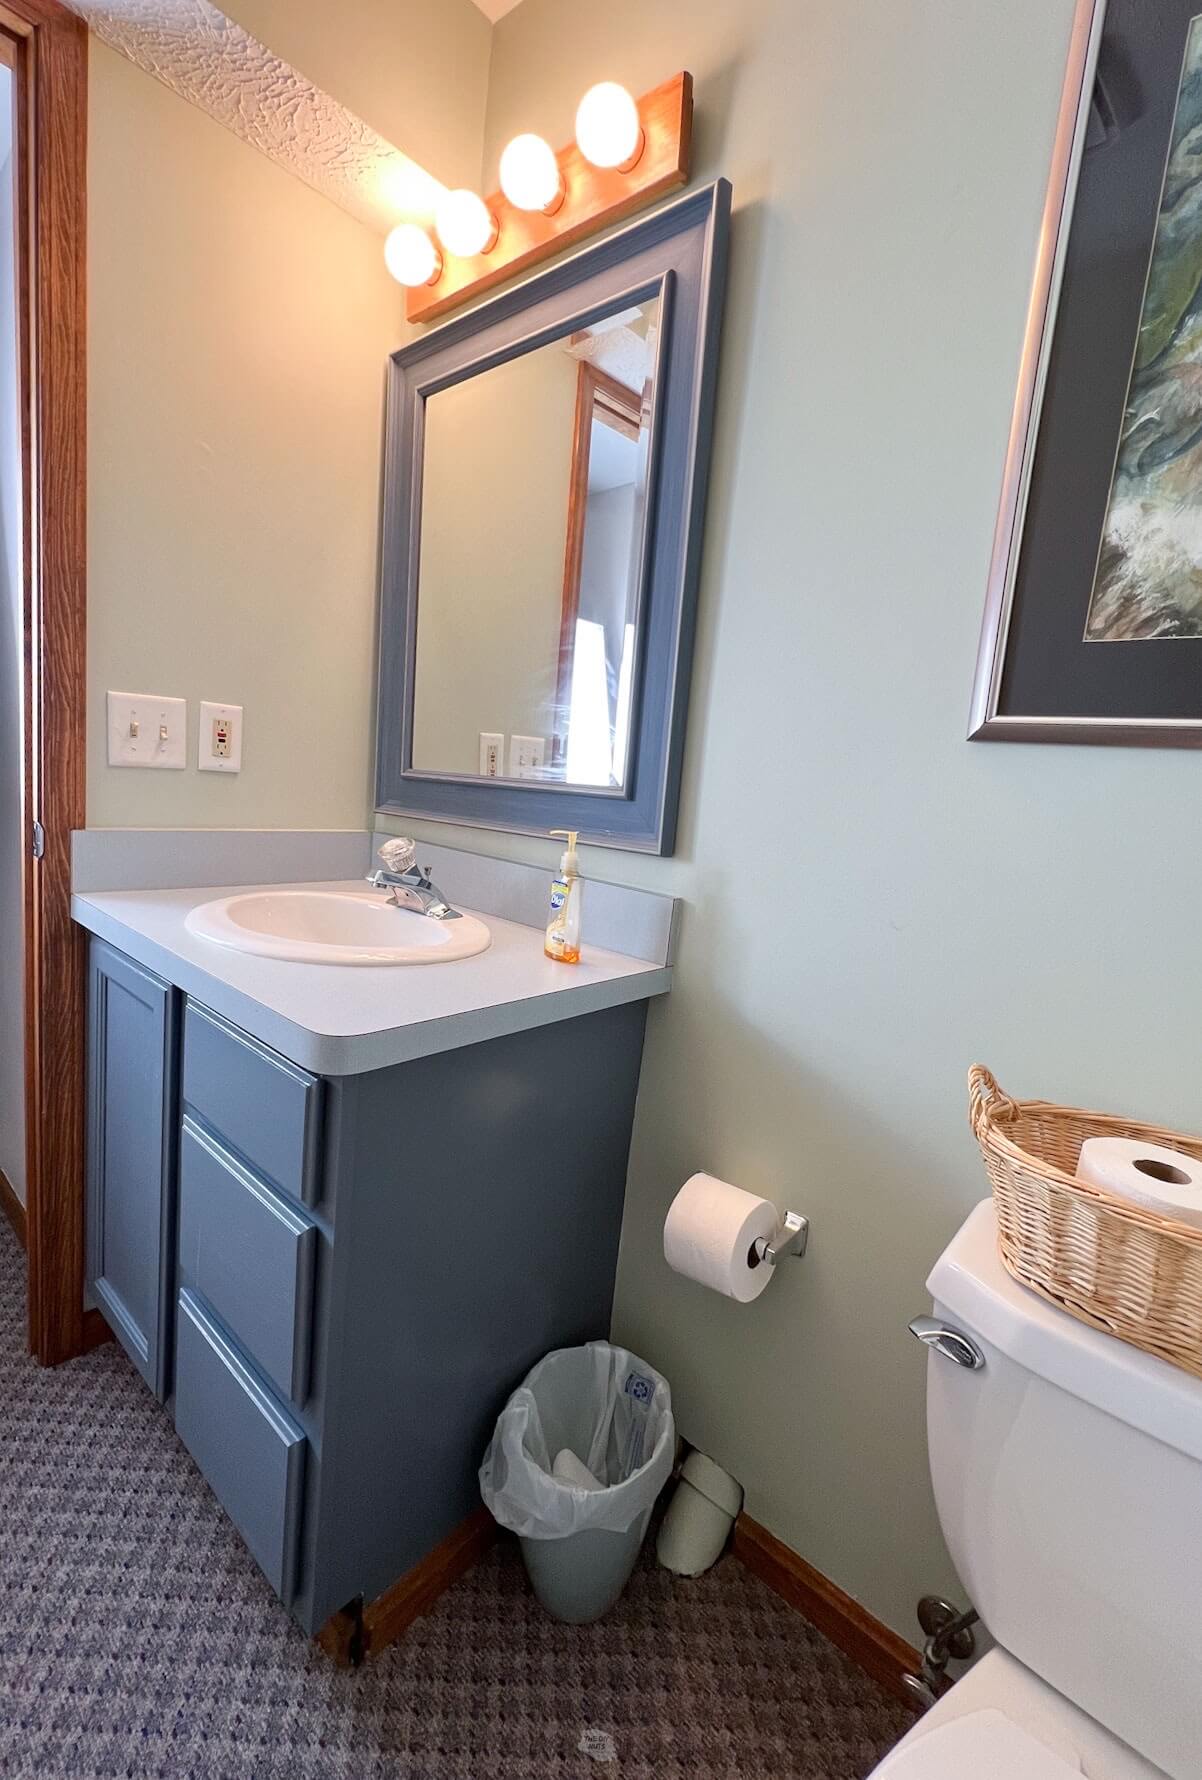 dusty blue painted bathroom vanity with blue laminate counters.